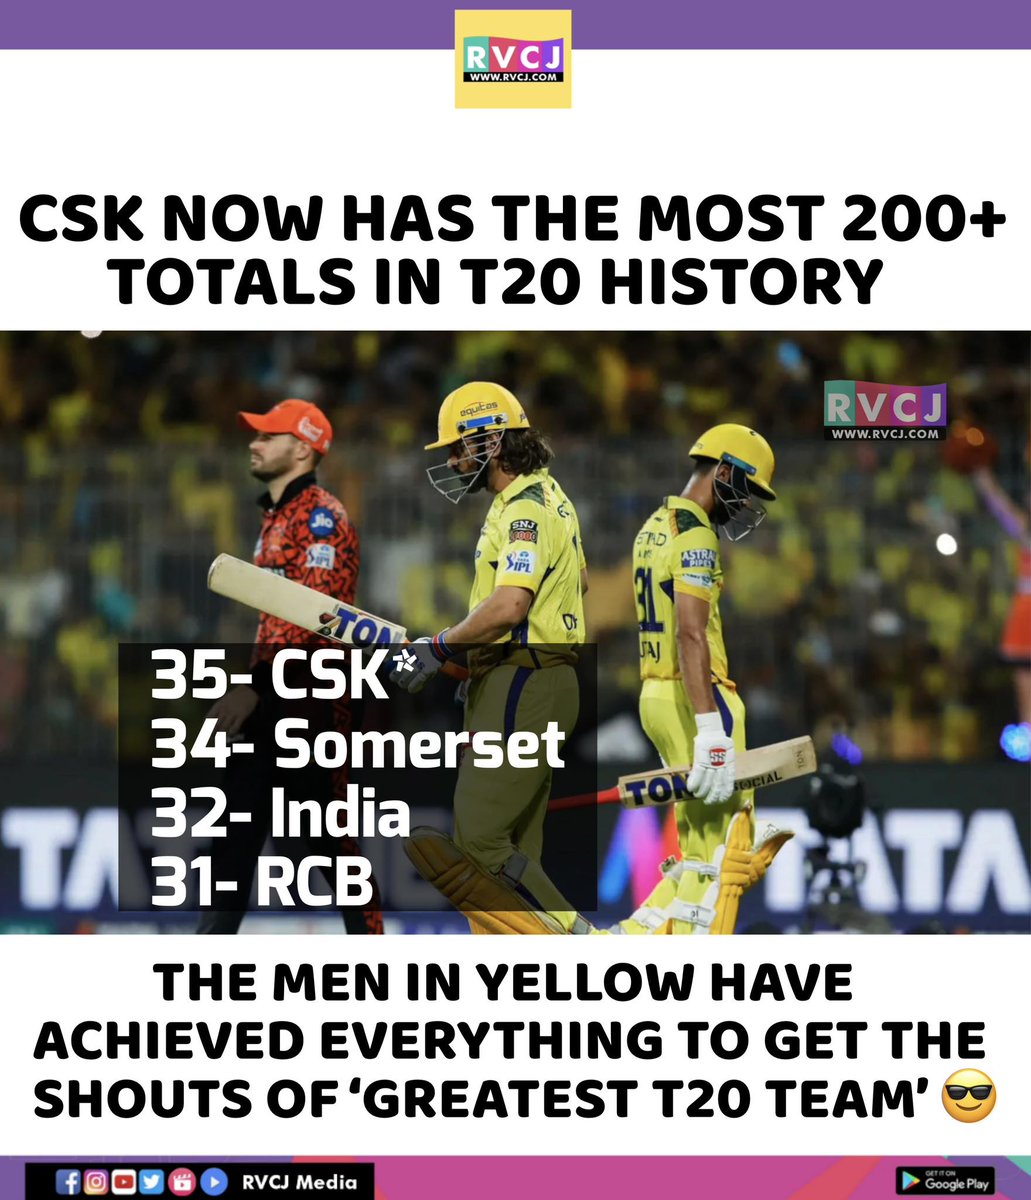 Most 200+ totals in T20 cricket